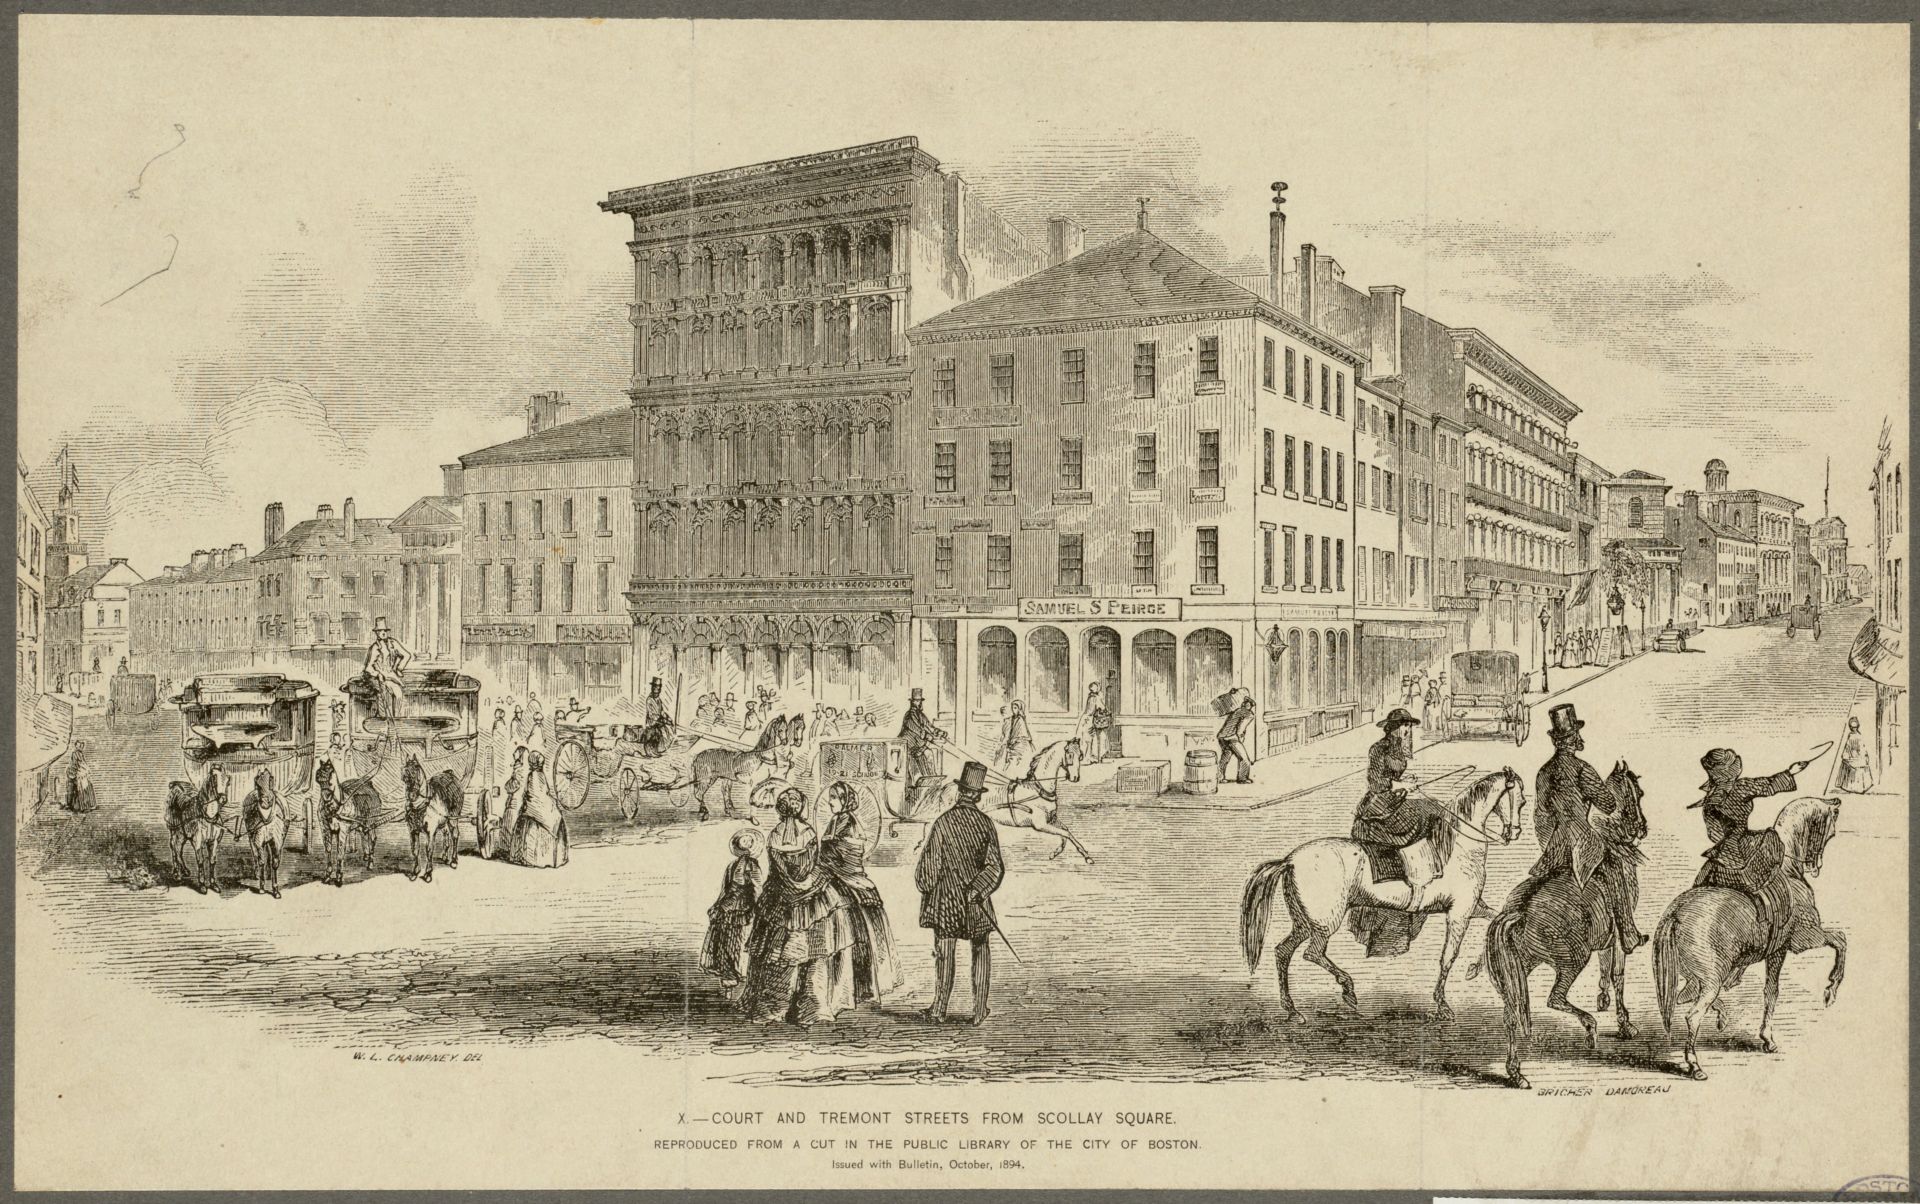 1894 print of Court and Tremont St from Scollay Square